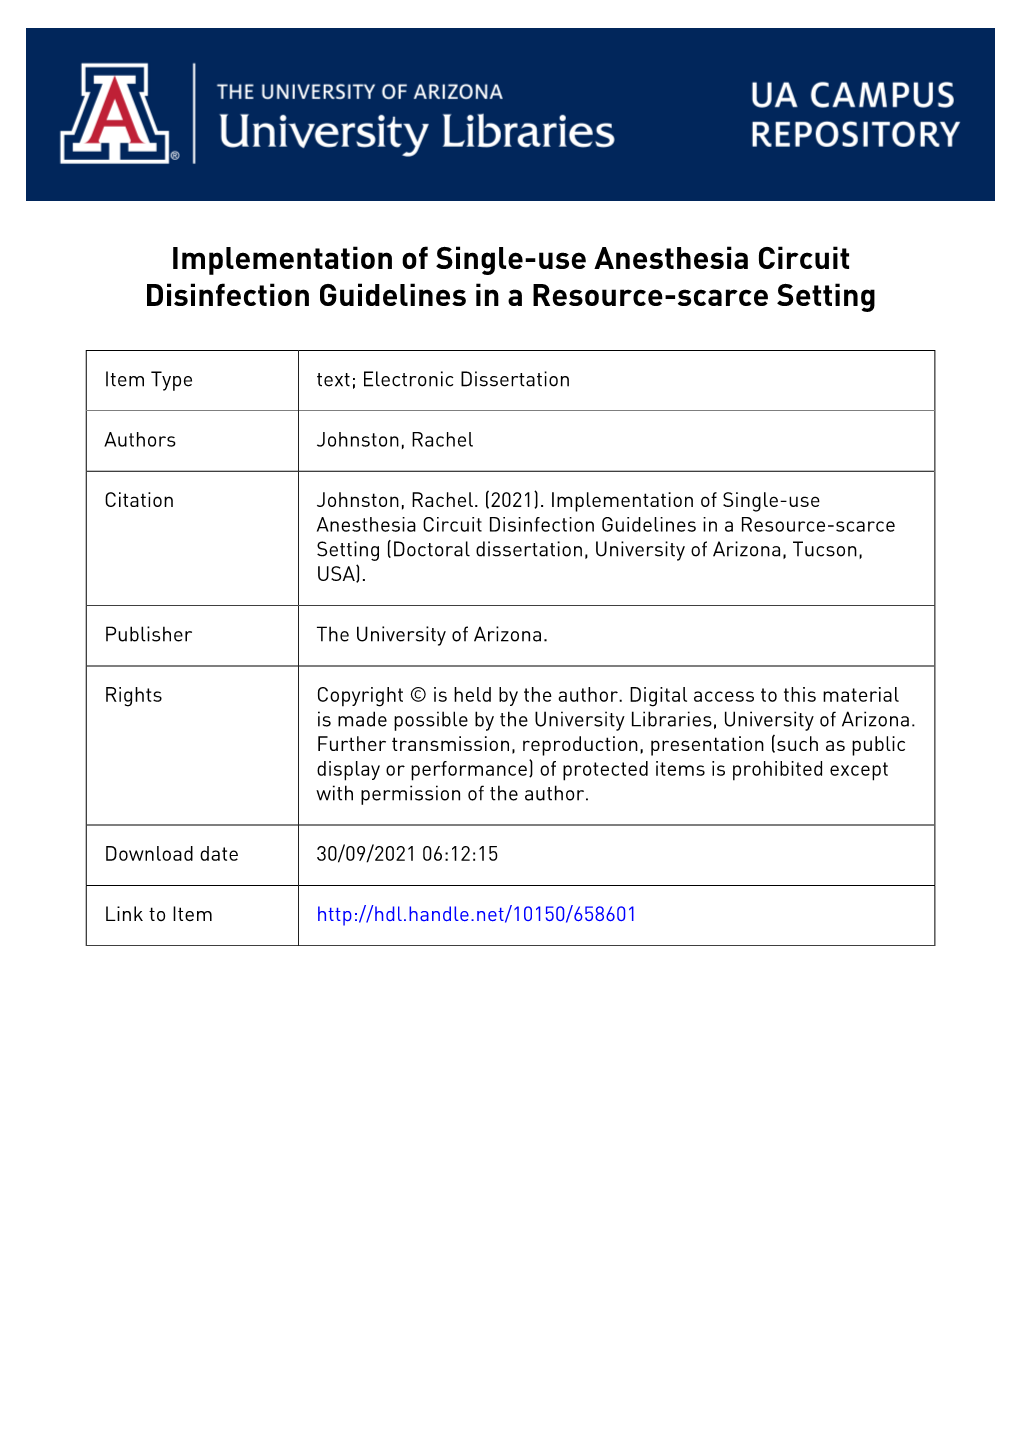 Implementation of Single-Use Anesthesia Circuit Disinfection Guidelines in a Resource-Scarce Setting